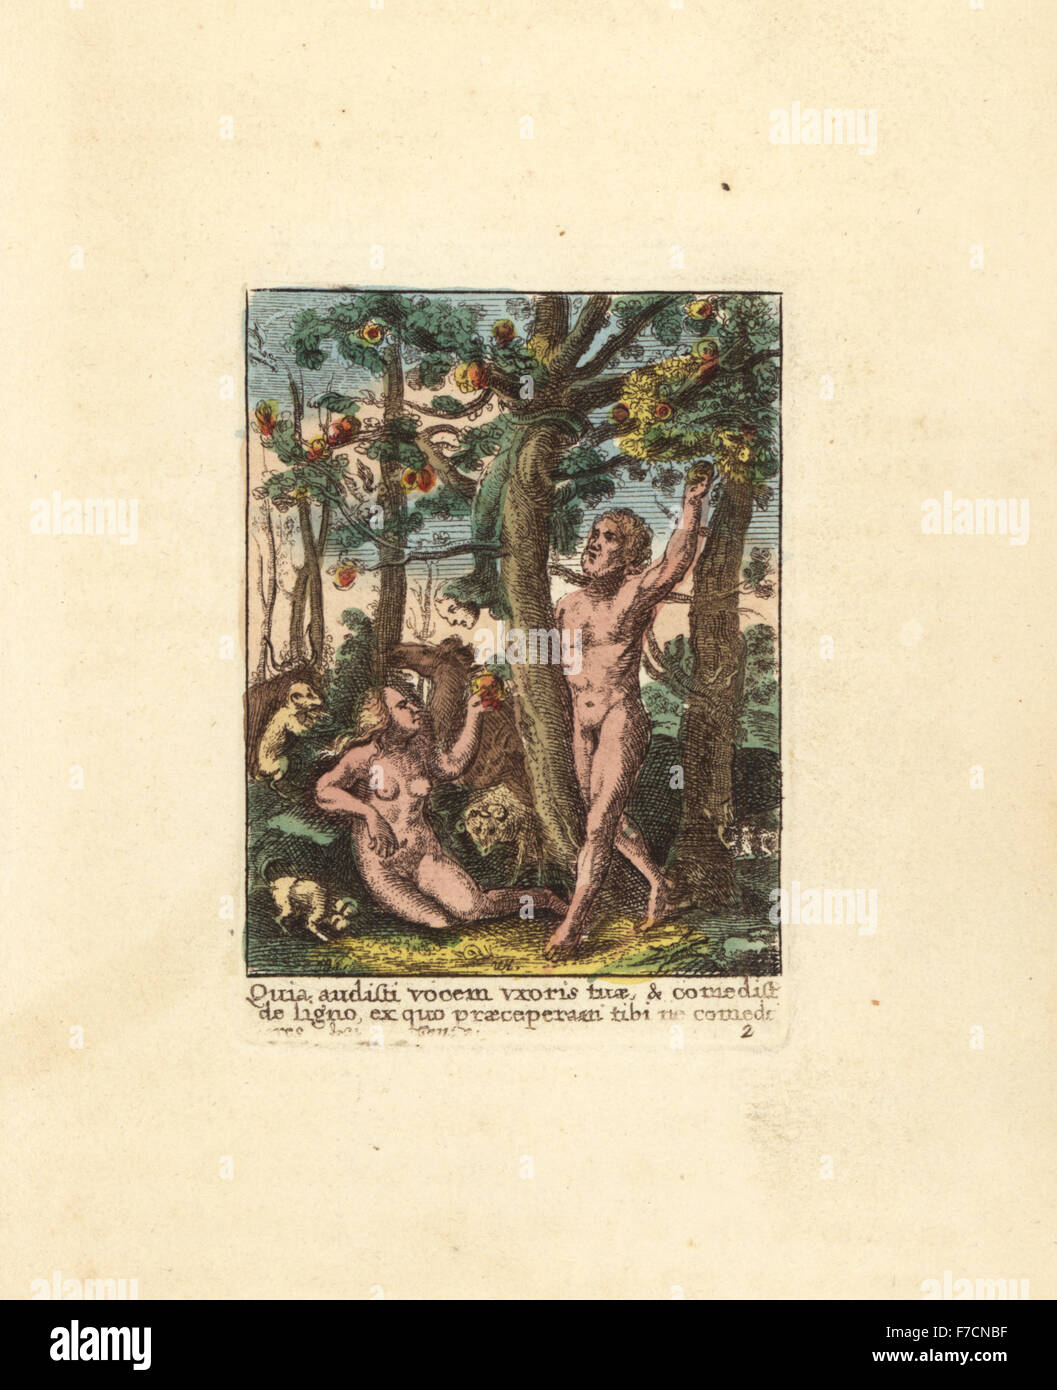 Adam plucking an apple and Eve tasting the forbidden fruit in the Garden of Eden, encouraged by a serpent with a human head. Handcoloured copperplate engraving by Wenceslaus Hollar from The Dance of Death by Hans Holbein, Coxhead, London, 1816. Stock Photo